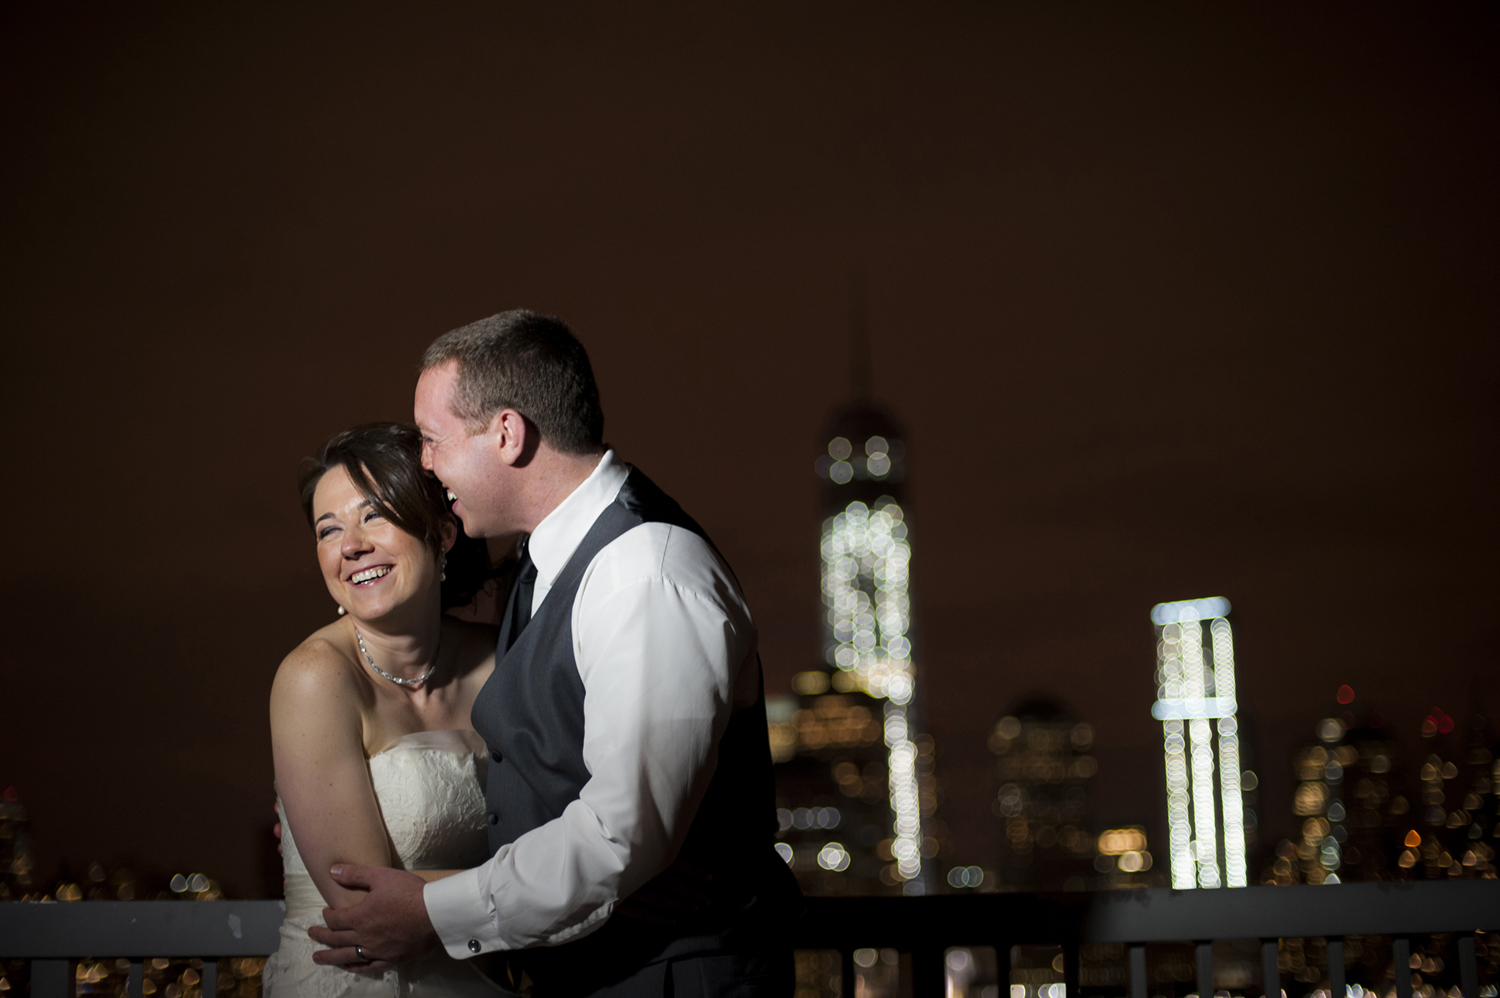 Portrait of bride and groom laughing against the NYC sklyine at night on their wedding day. Jersey City wedding photographers